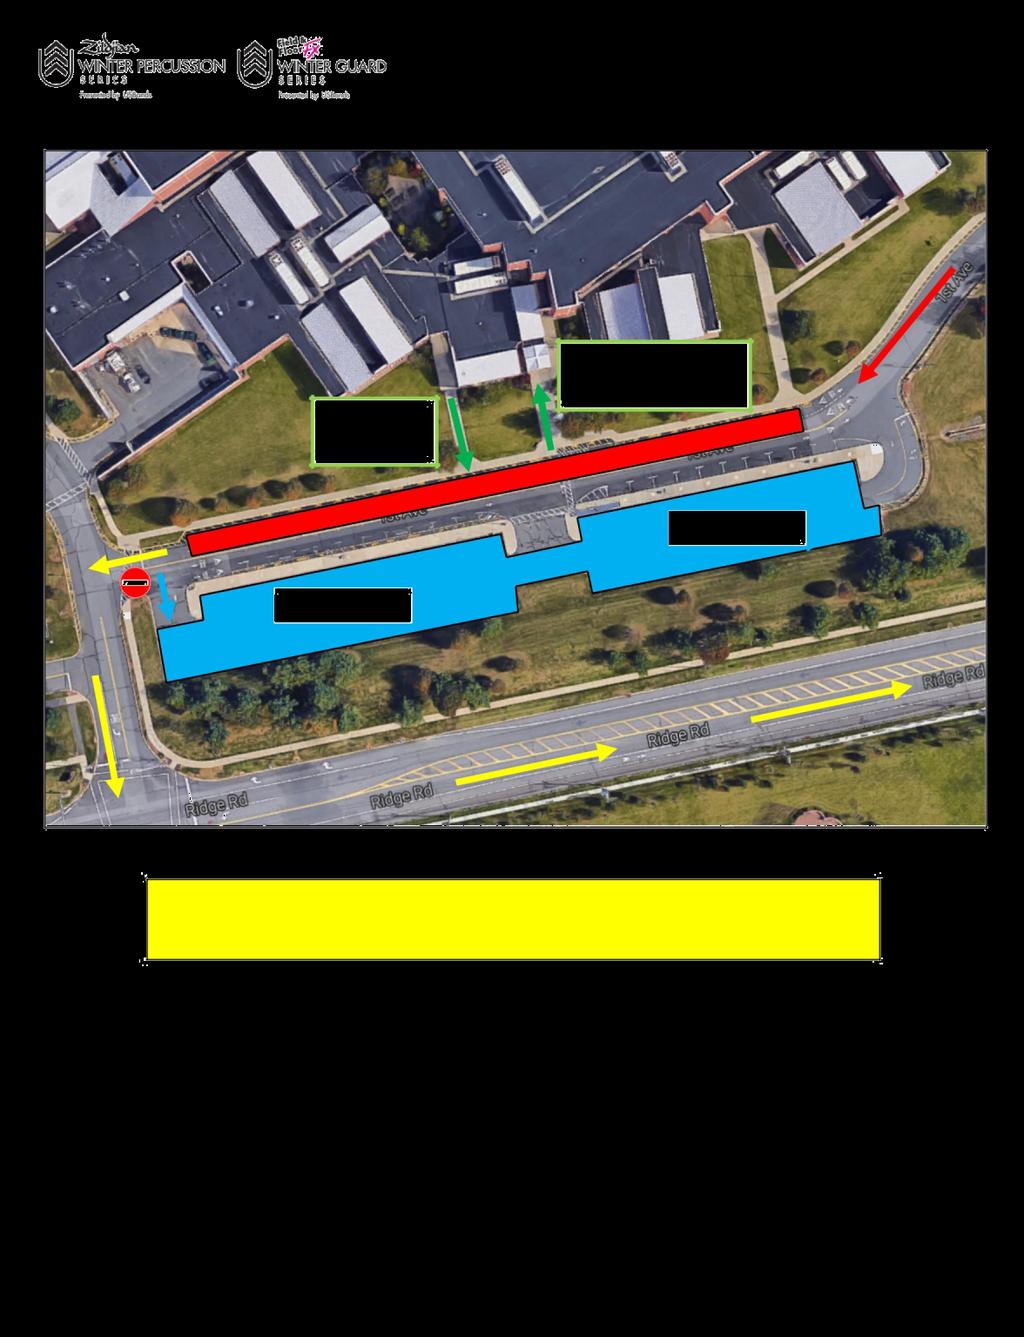 Unloading/Loading Zone Equipment/Unit Entrance & Check-In Equipment/ Unit Exit Truck Parking Truck Parking **THIS IS A HIGH TRAFFIC AREA** PLEASE BE VERY CAUTIOUS; BE AWARE